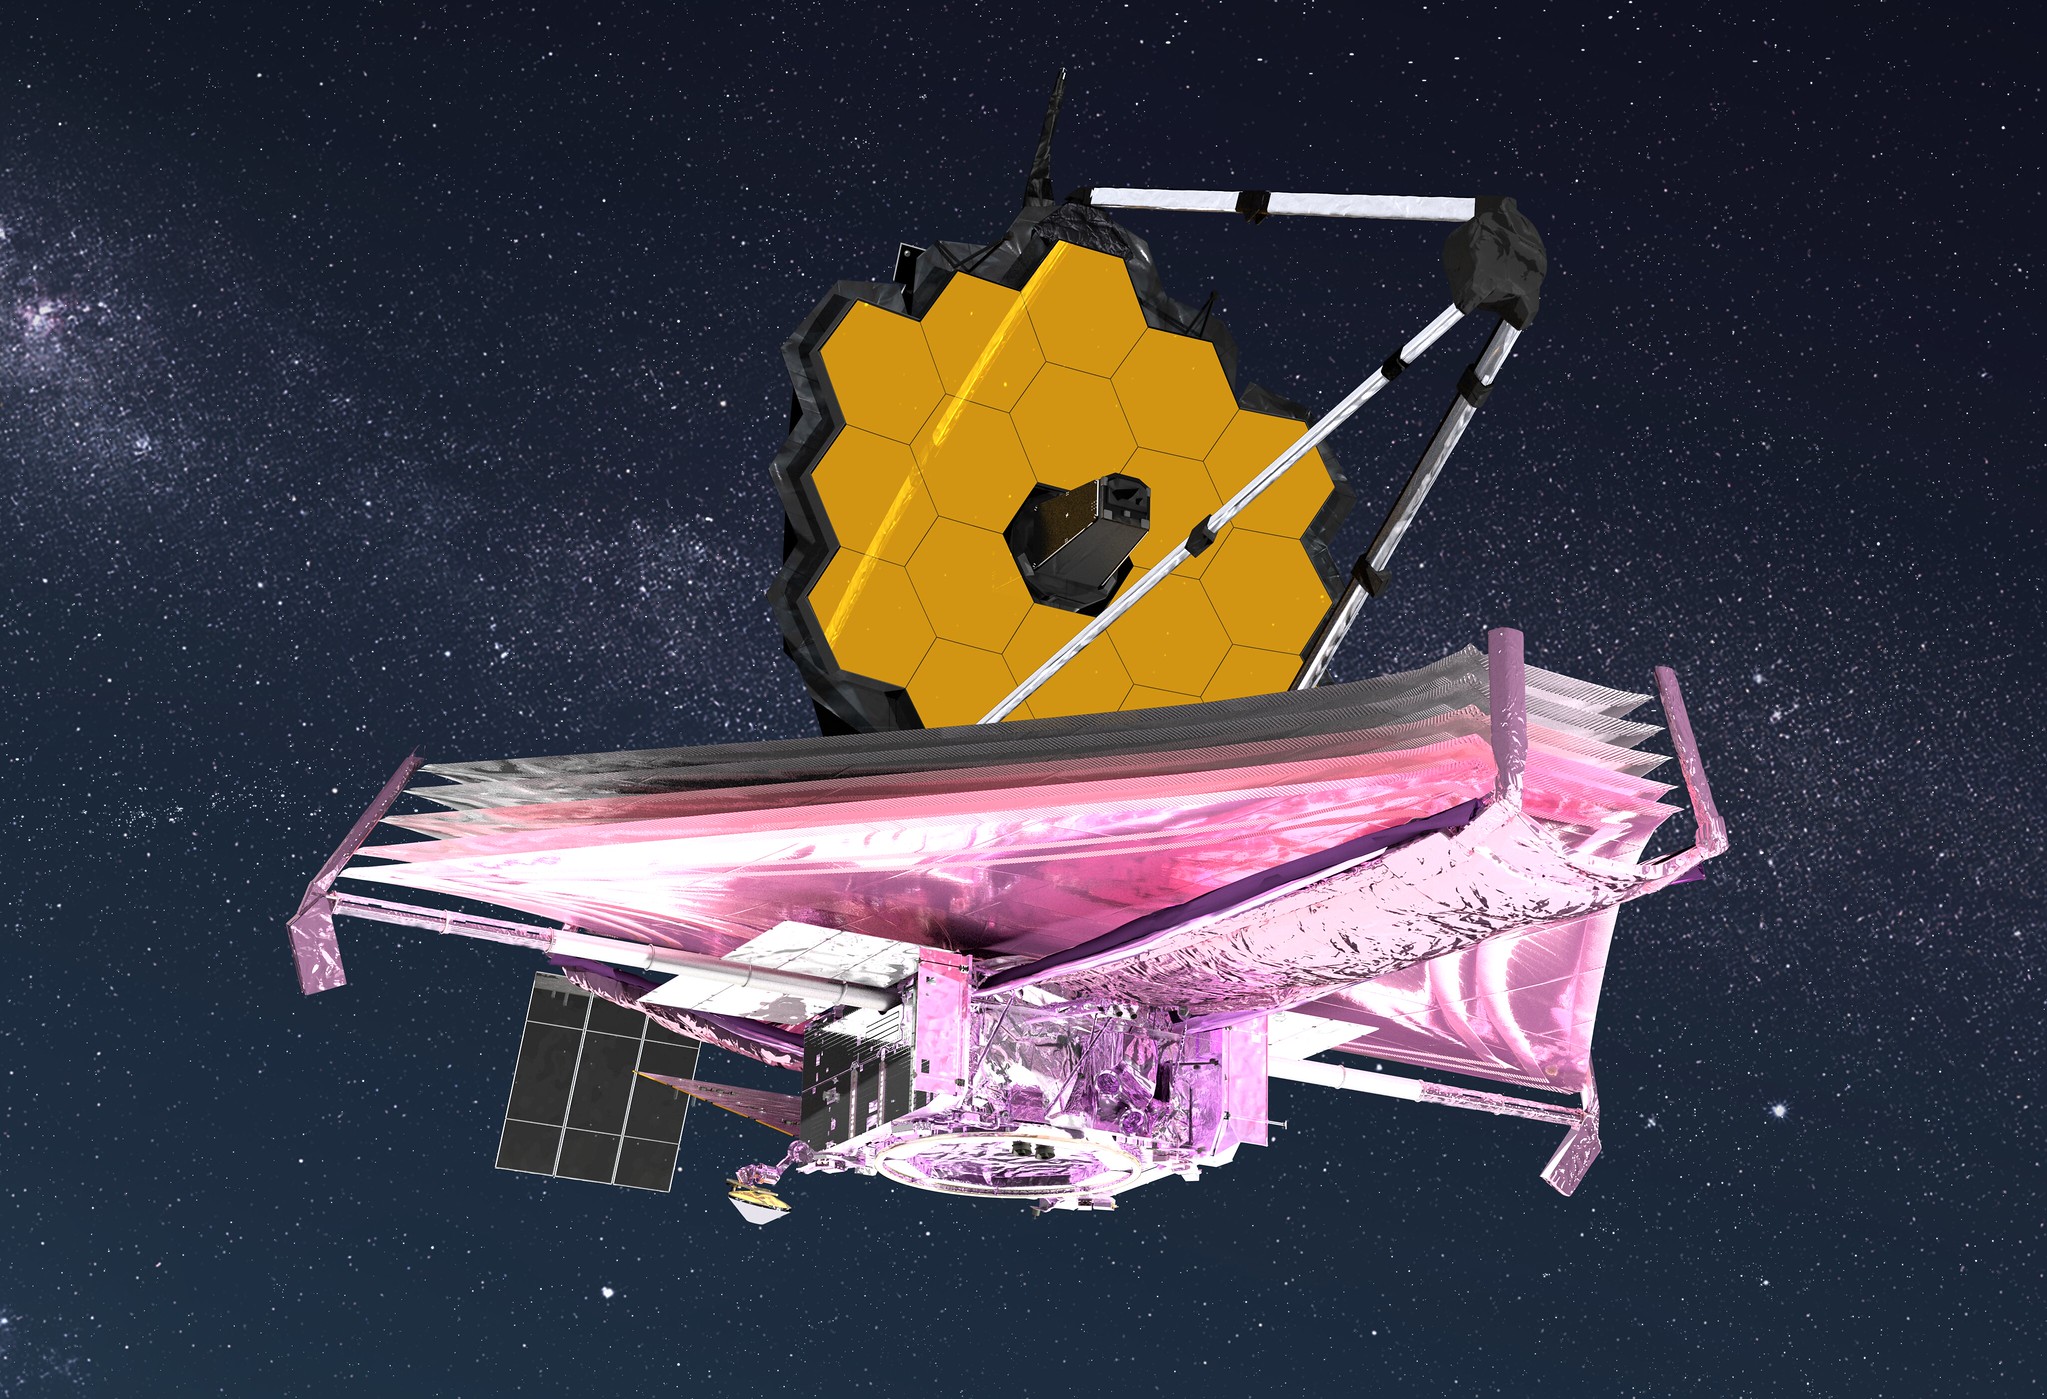 Artist's rendition of a space telescope with a yellow reflector and pink and white metallic triangular base